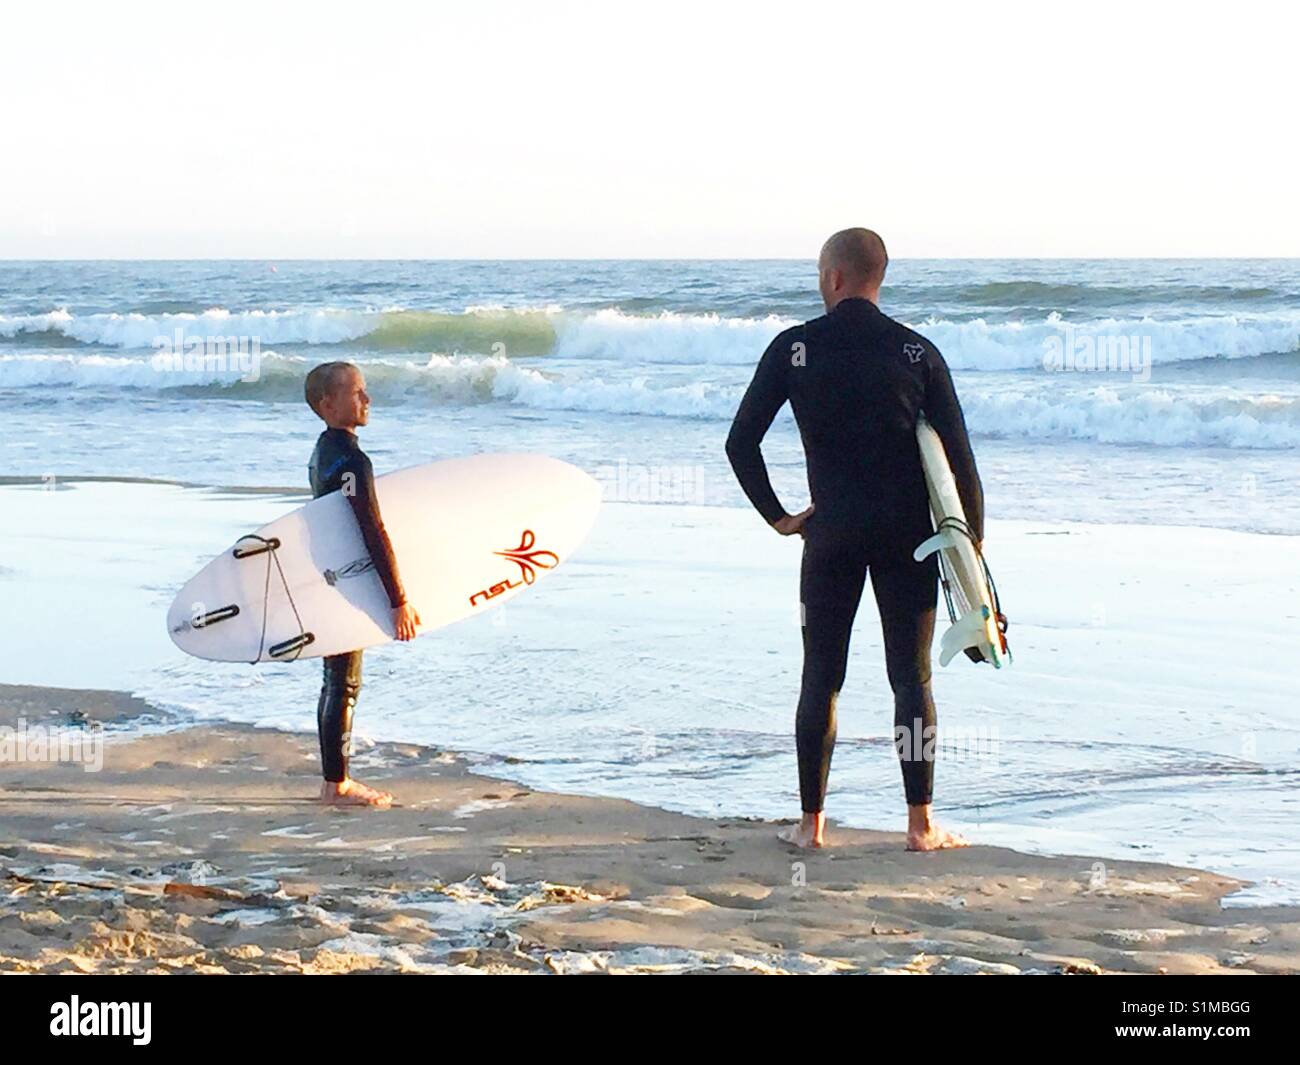 Father and son surfers standing on beach checking out the waves. Pismo Beach, California, United States Stock Photo